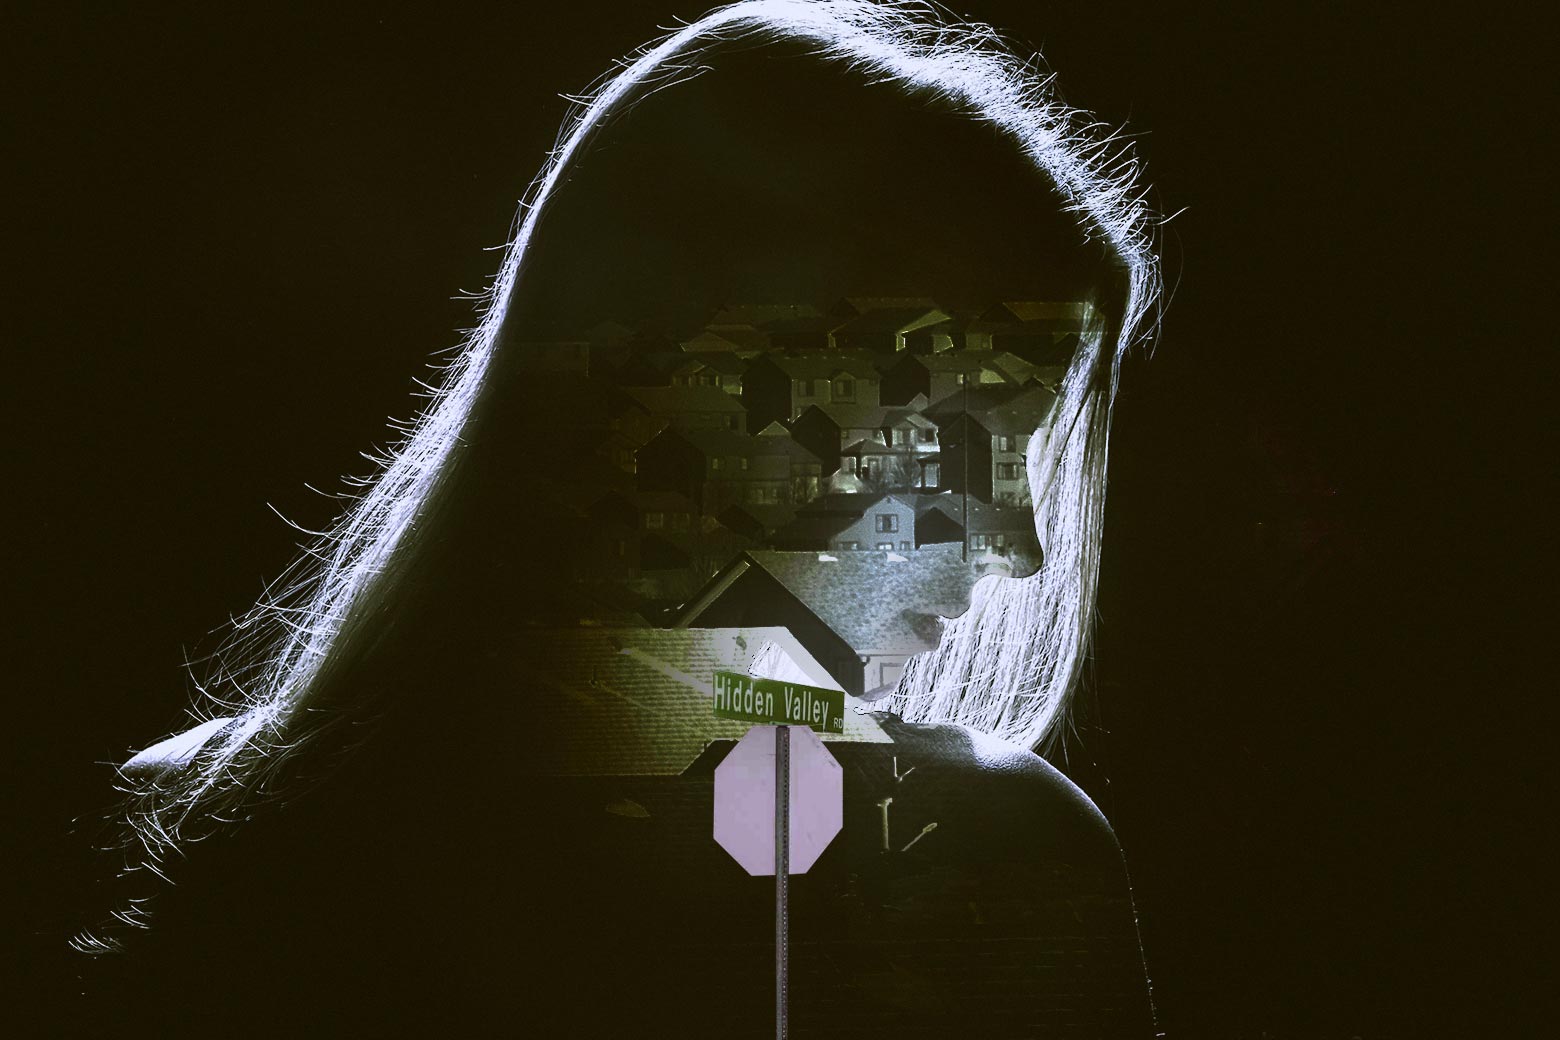 A woman in the dark, translucent and looking down, imposed over a suburban neighborhood and the Hidden Valley Road sign.